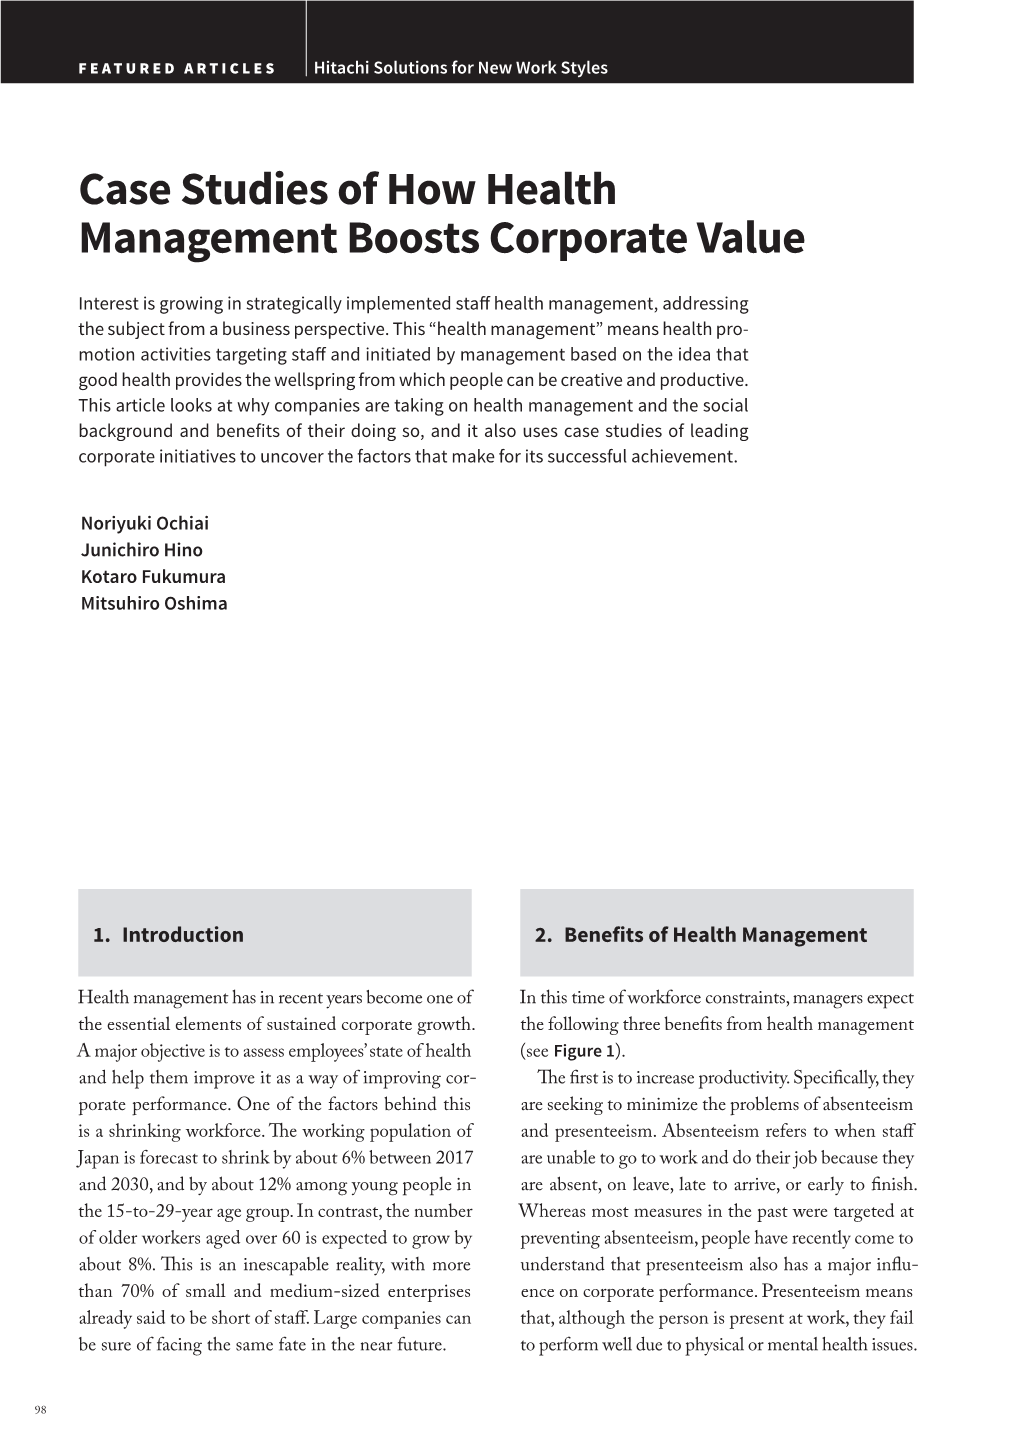 Case Studies of How Health Management Boosts Corporate Value